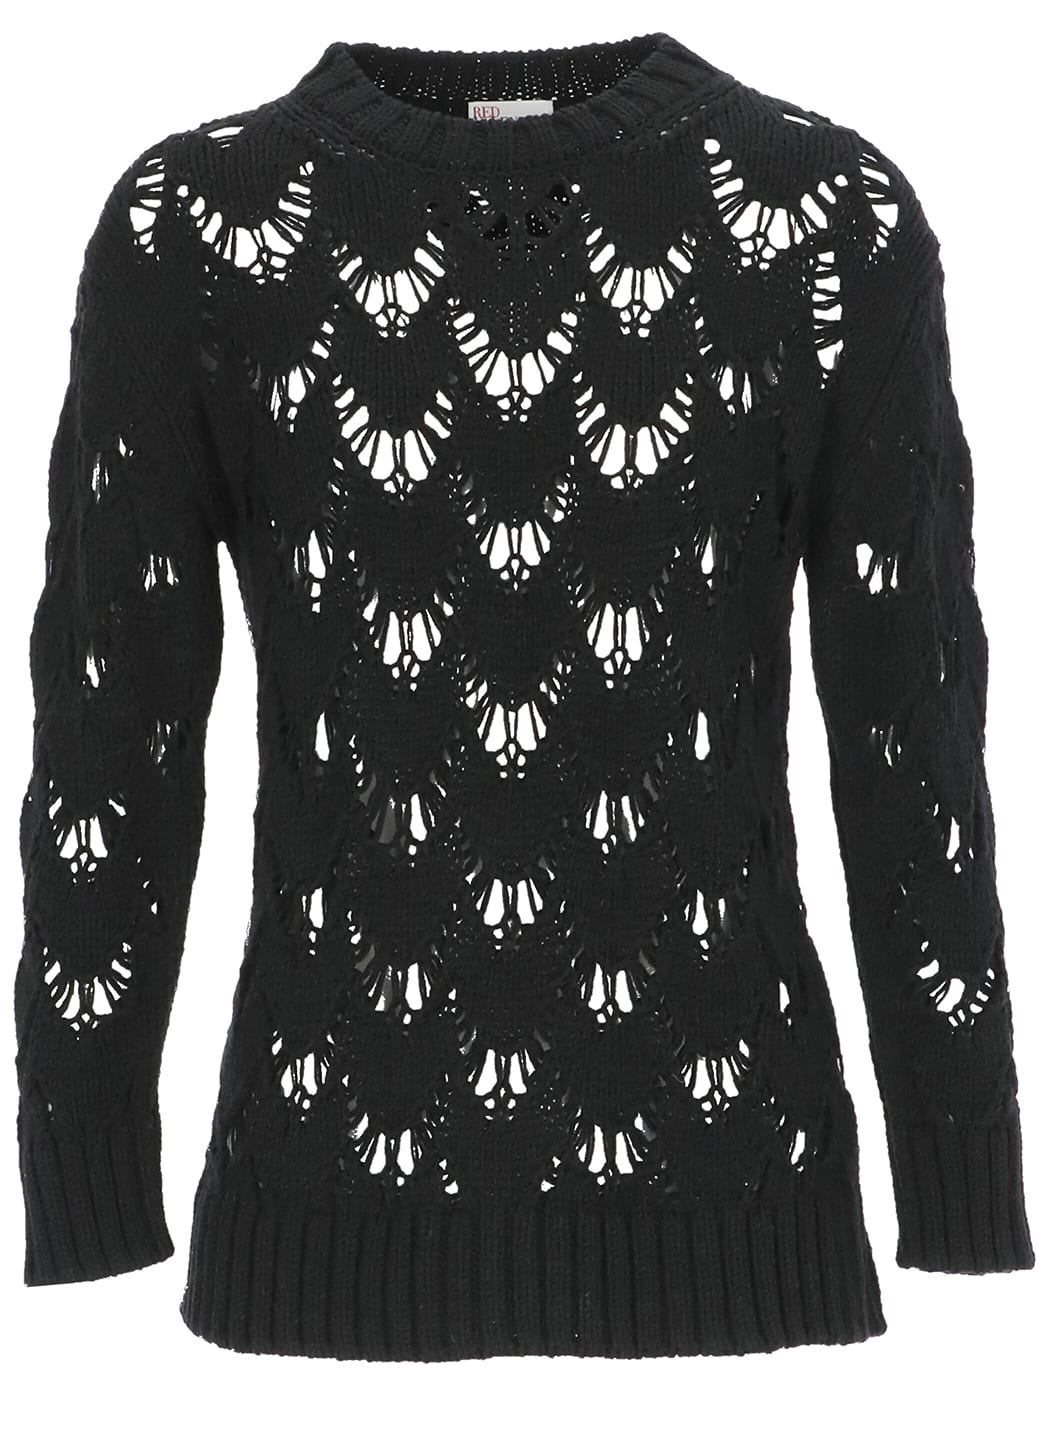 RED Valentino Cut-out Sweater